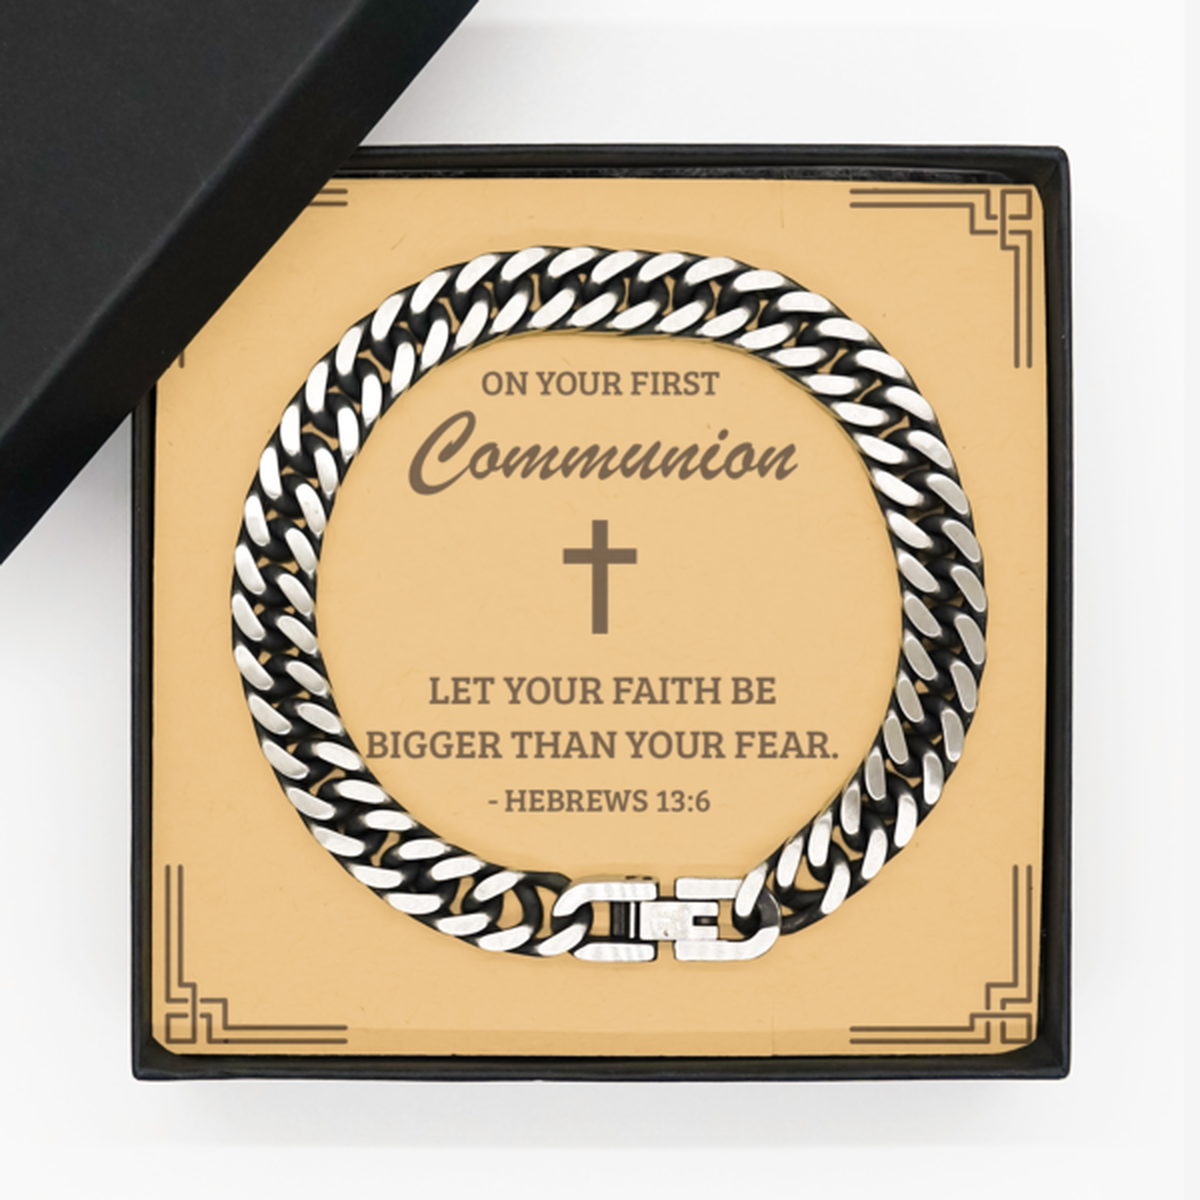 First Communion Gifts for Teenage Boys, Let your faith be bigger than your fear, Cuban Link Chain Bracelet with Bible Verse Message Card, Religious Catholic Bracelet for Son, Grandson, Dad, Godfather